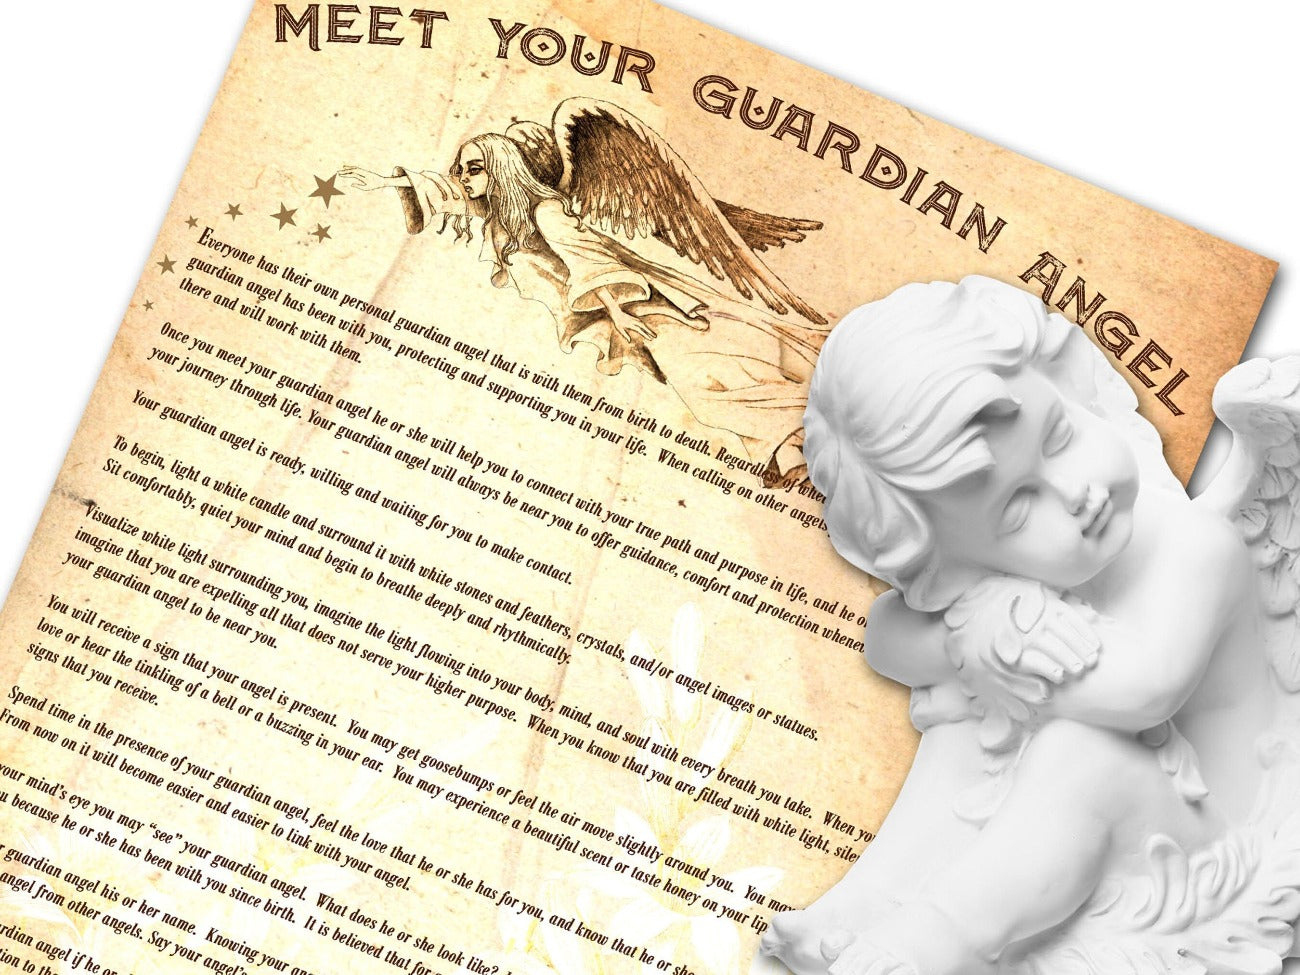 MEET Your GUARDIAN ANGEL closeup image showing text detail. GUARDIAN ANGEL a Ritual to Meet Guardian Angel, Wicca Witchcraft, Light Worker Magic, Angel Guidance Folklore, Journal Grimoire Printable - Morgana Magick Spell